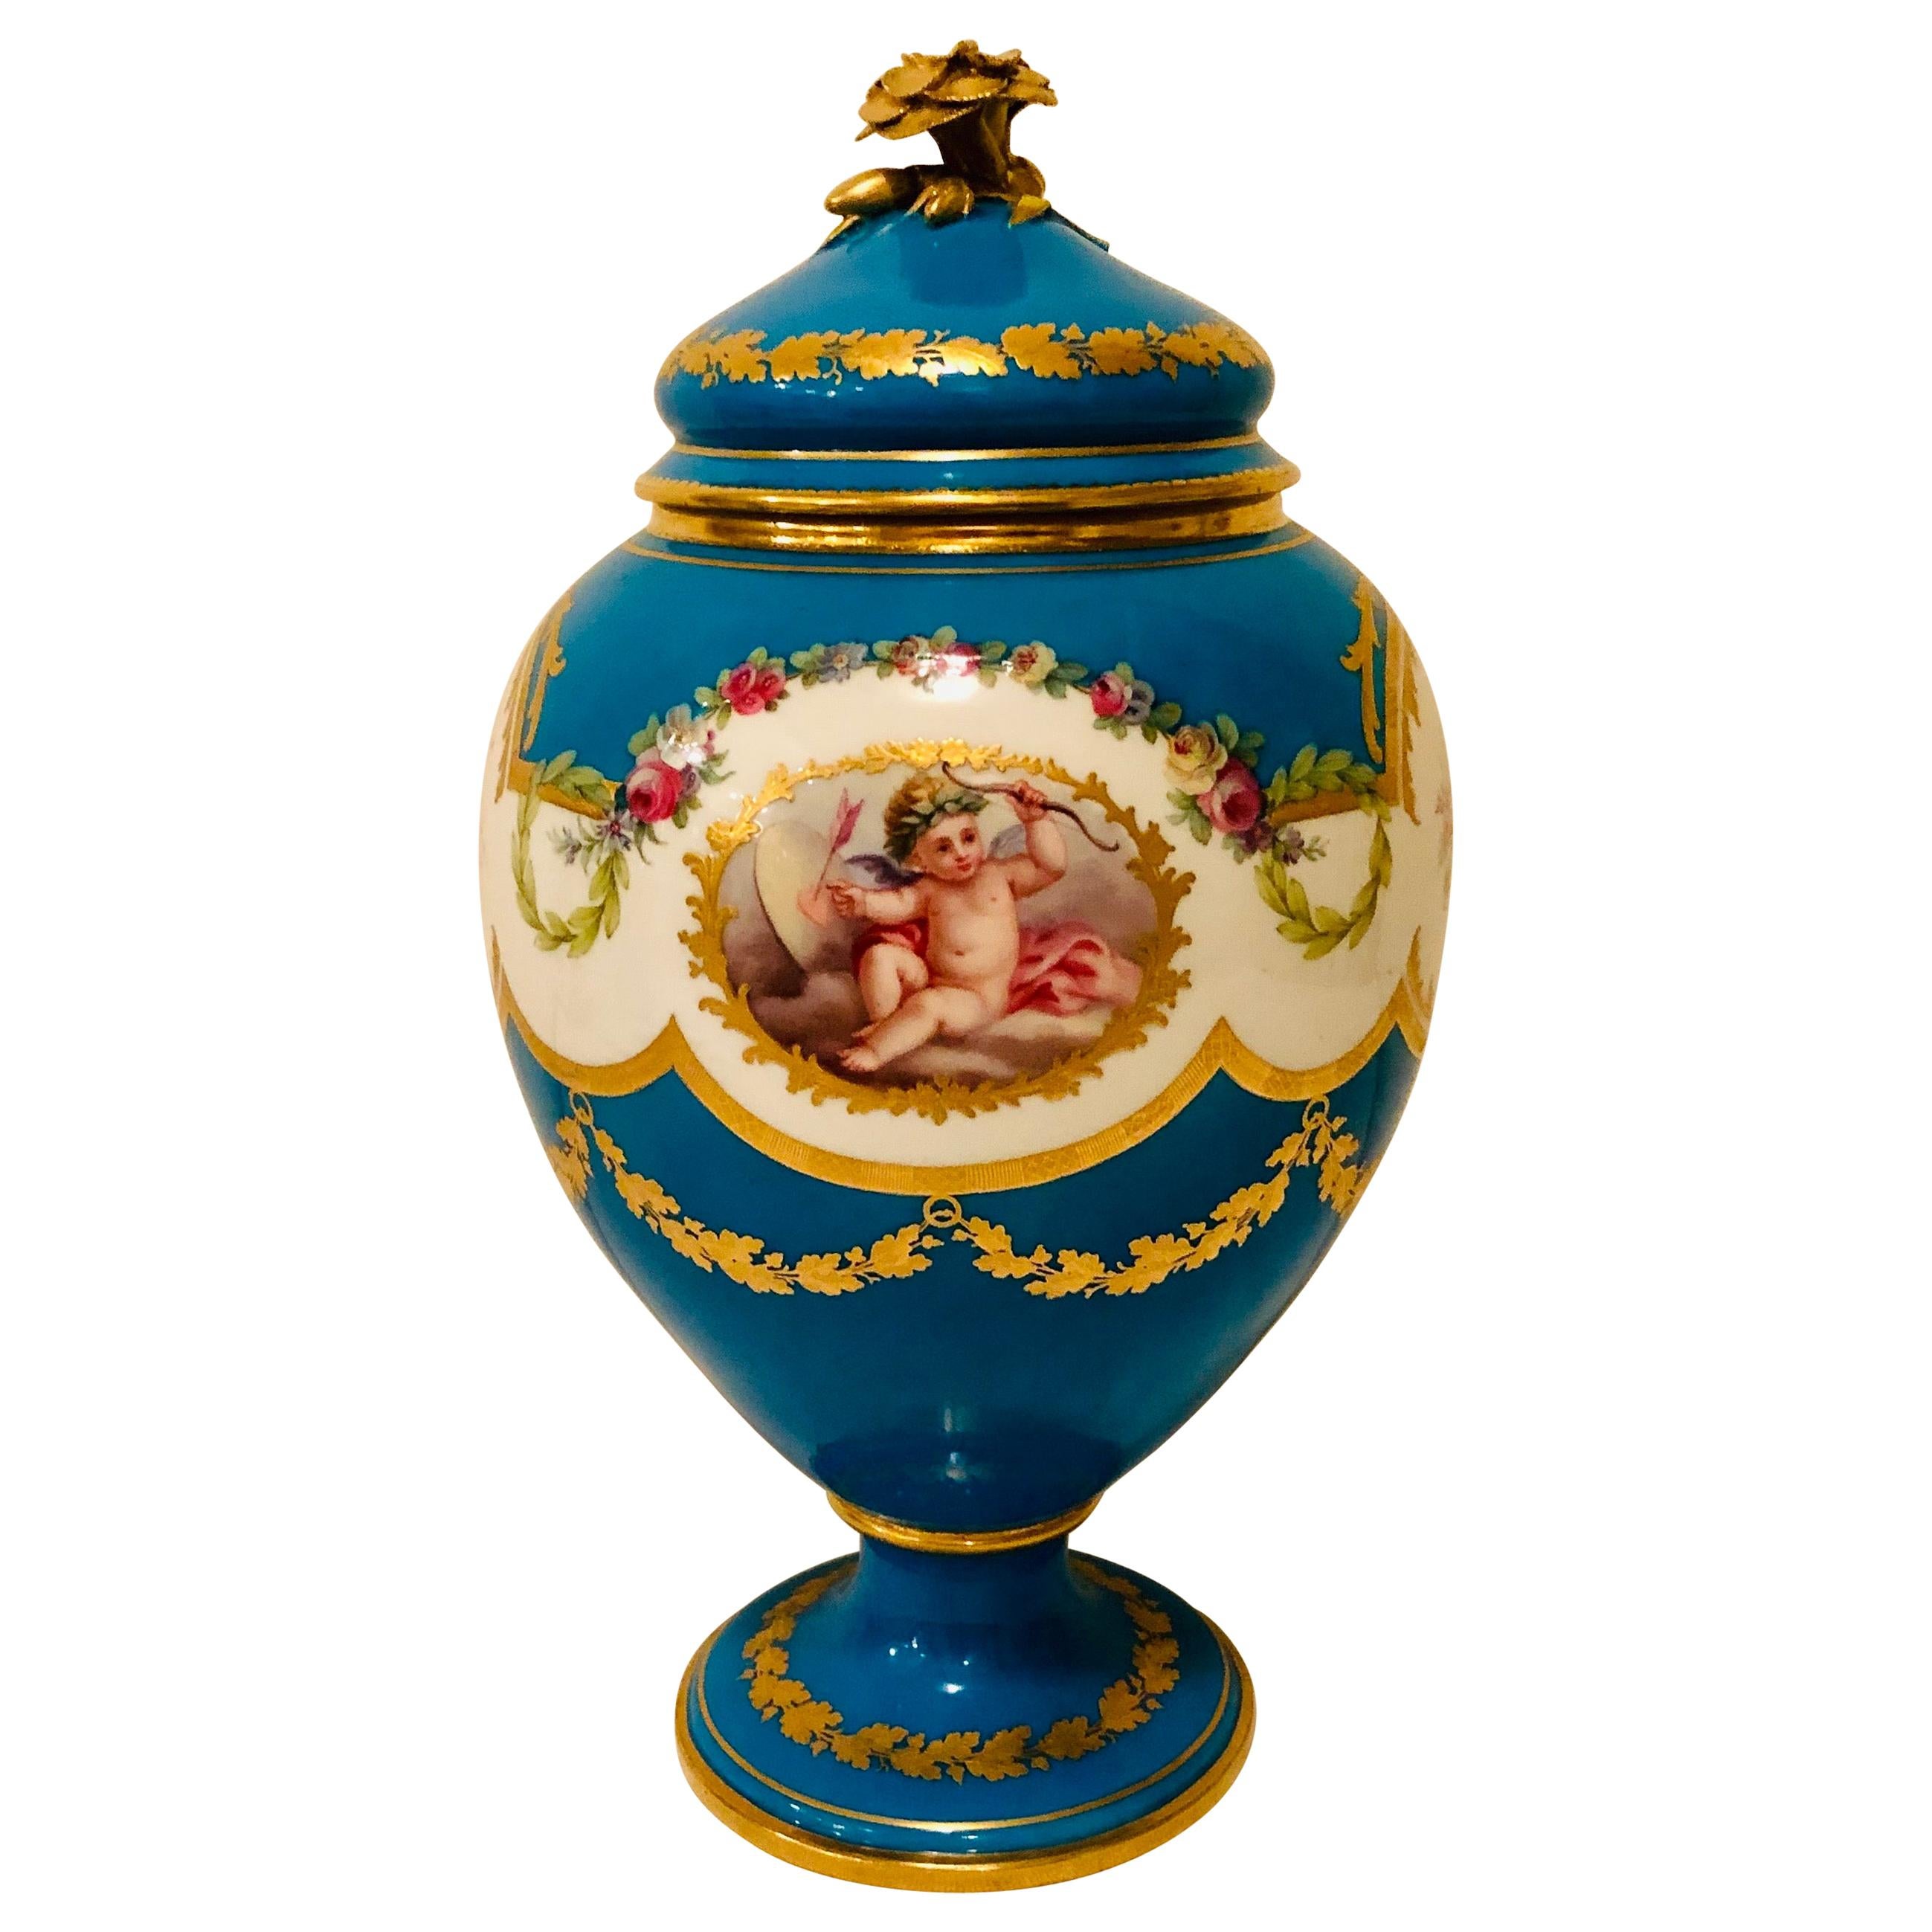 Celeste Blue Minton Urn Painted with Cherubs and Flowers in the Style of Sèvres